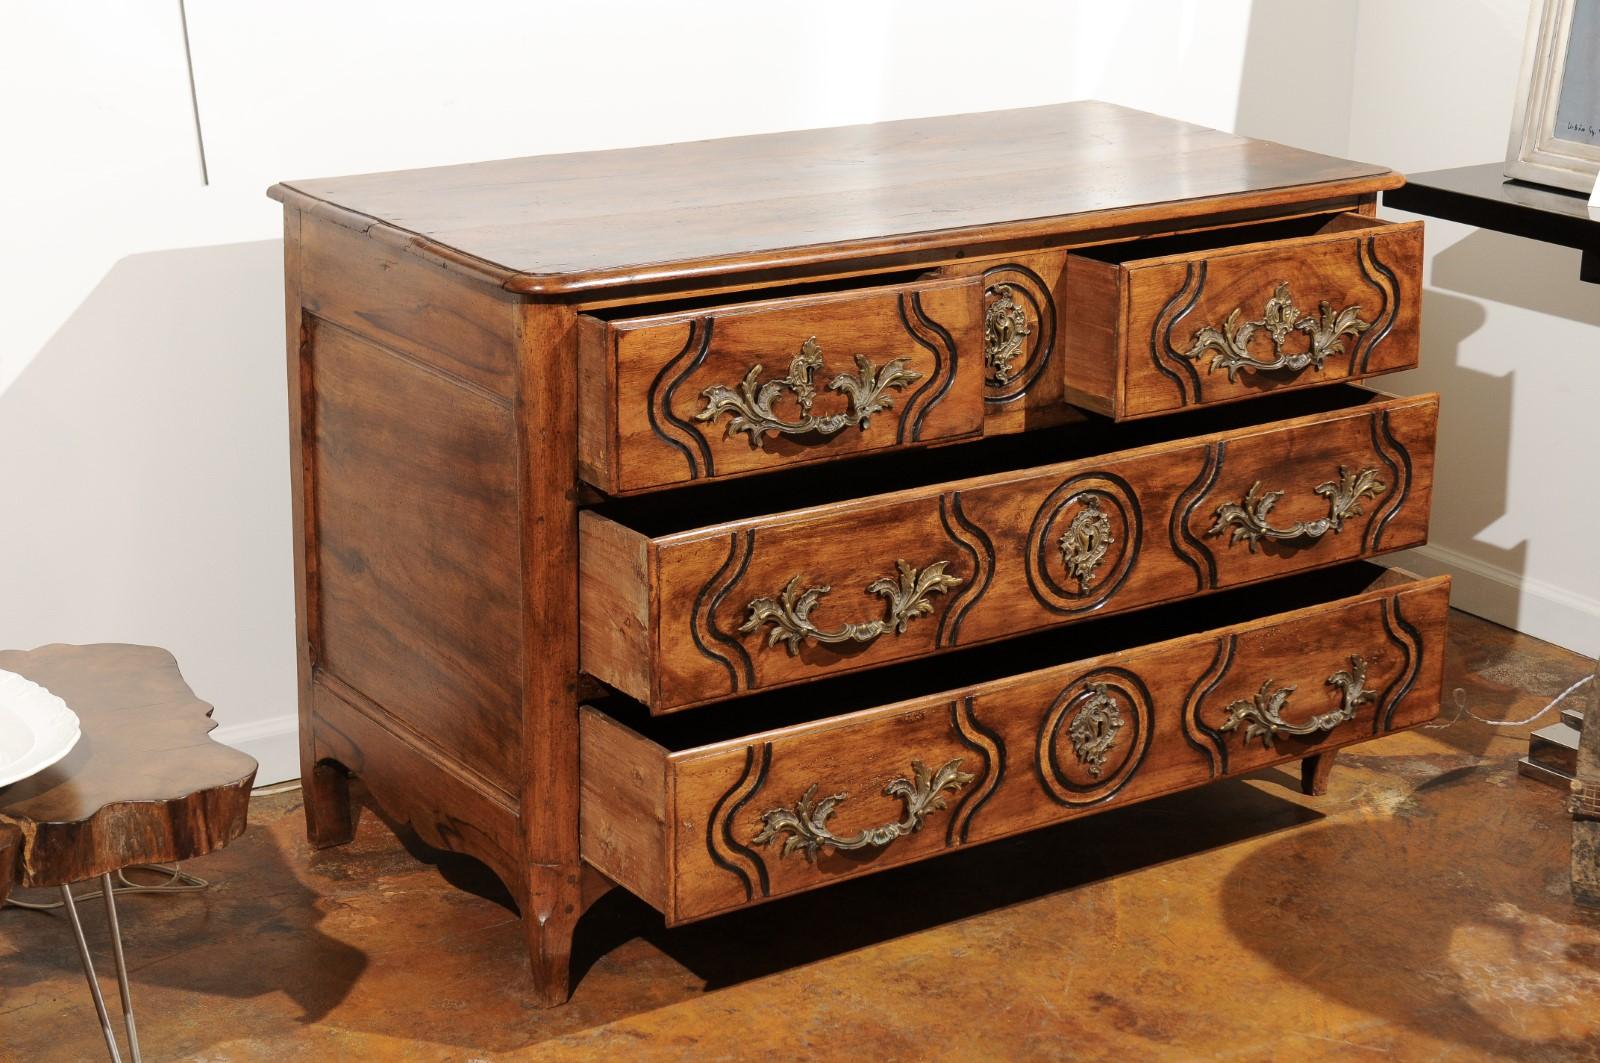 19th Century French Napoleon III Period Parisienne Commode with Four Drawers, circa 1850